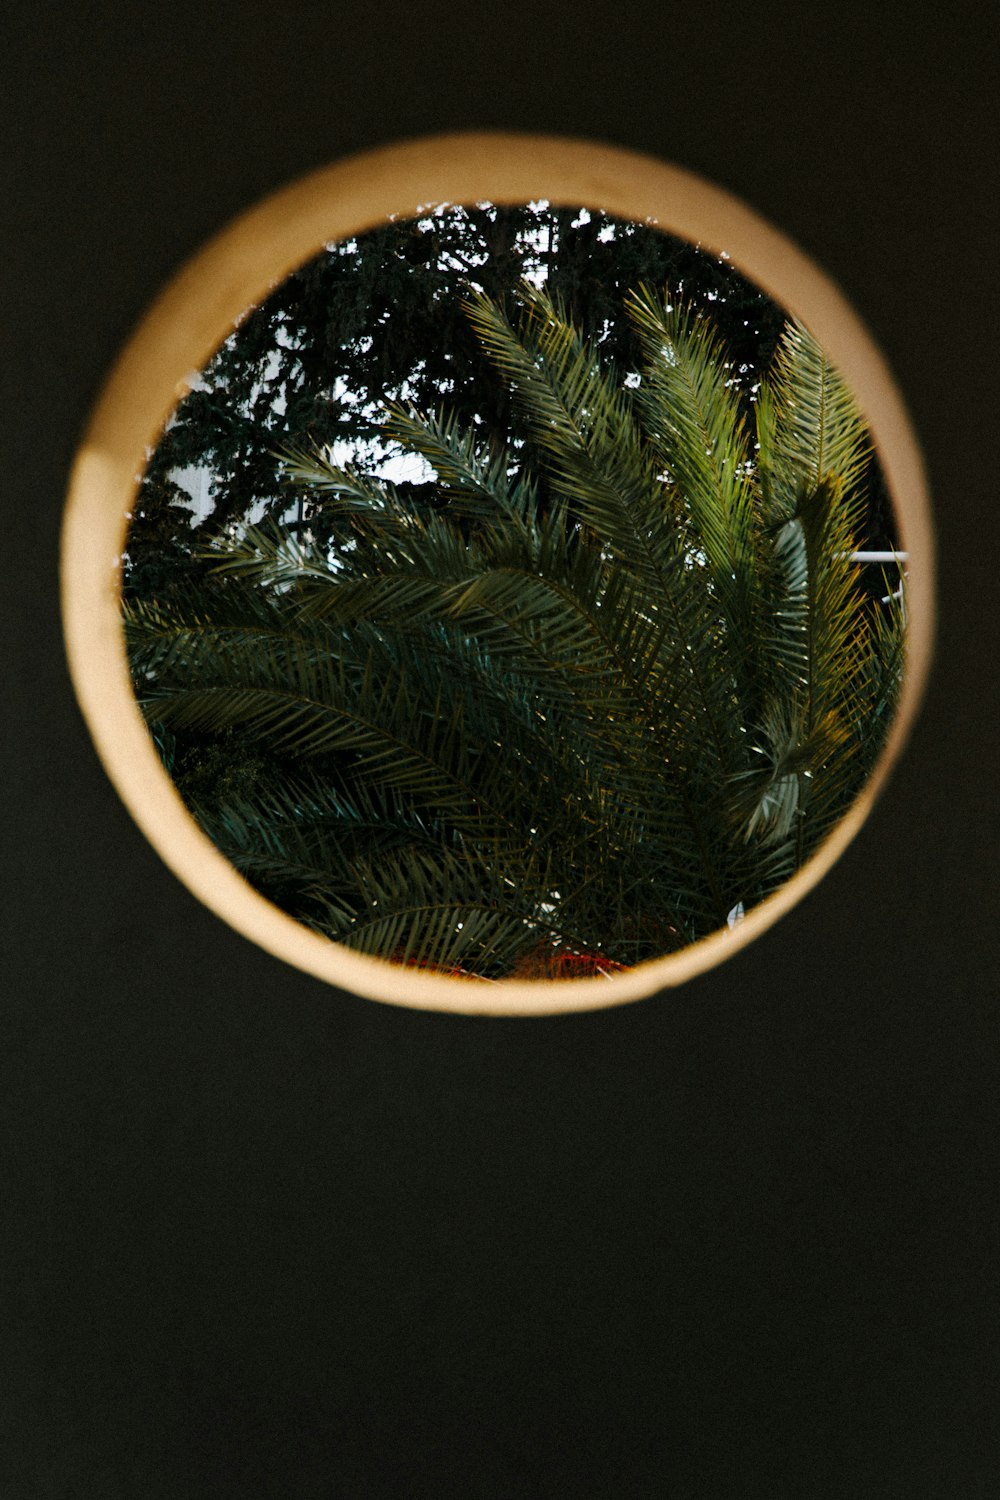 a mirror with a reflection of a tree in it